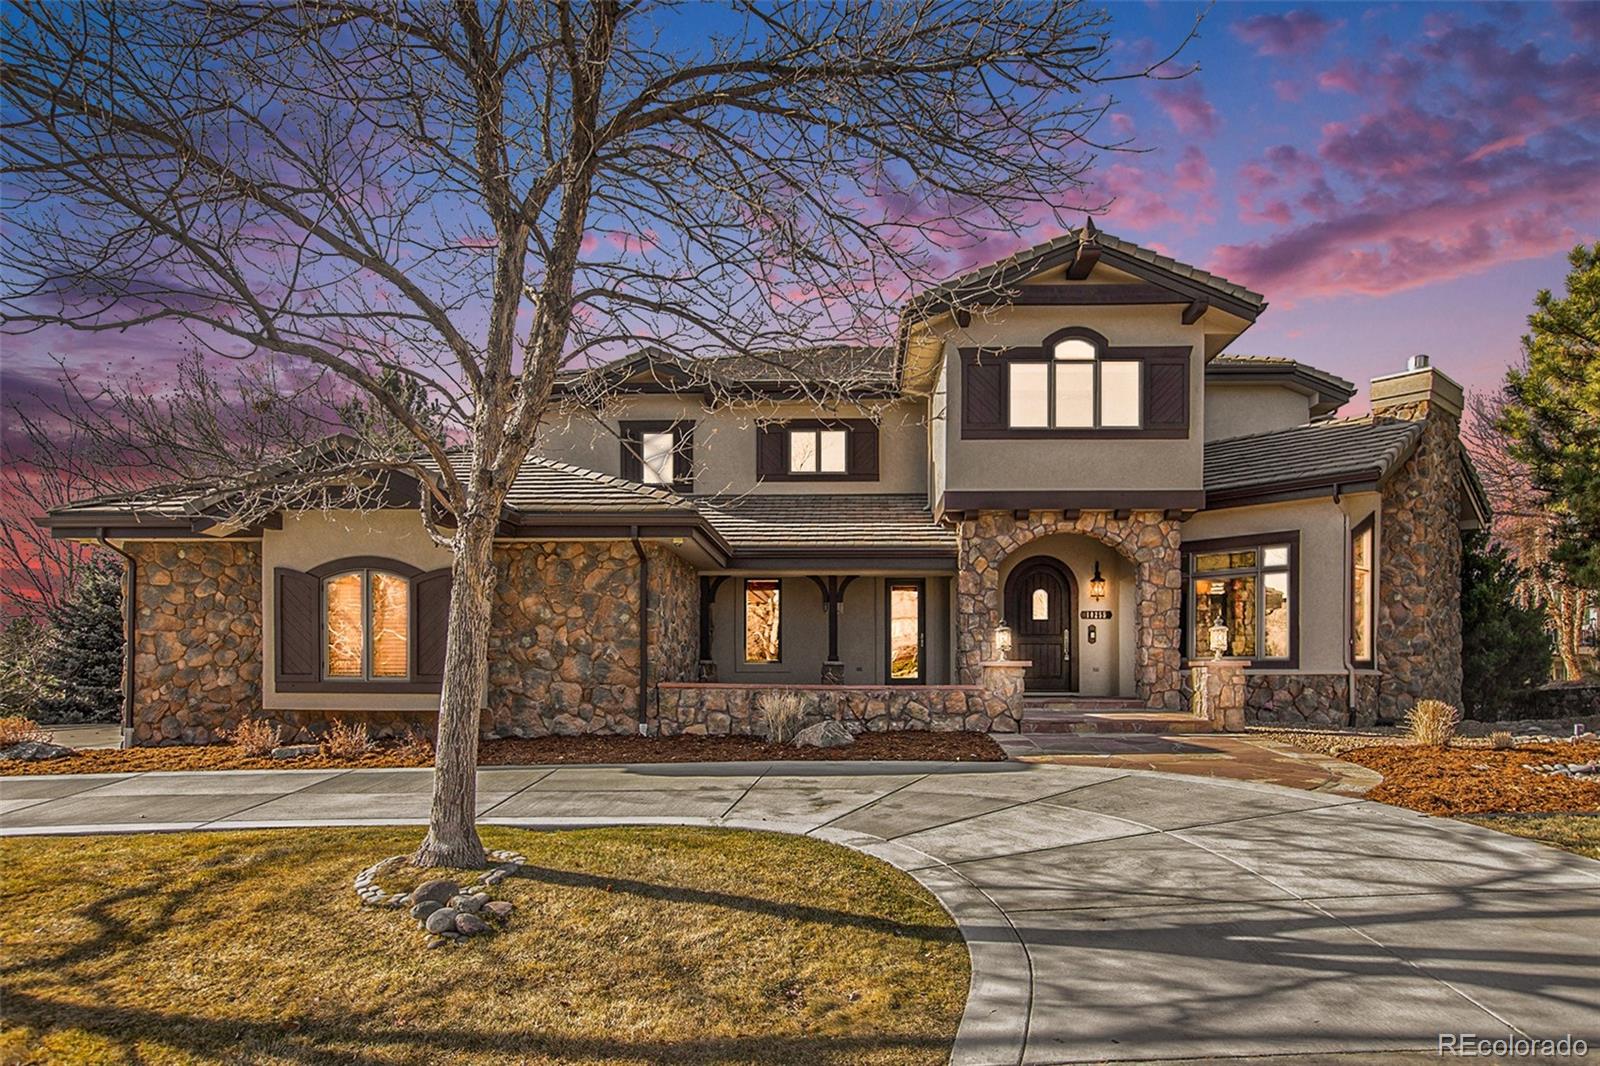 10255  Dowling Court, highlands ranch MLS: 4773369 Beds: 5 Baths: 8 Price: $2,700,000